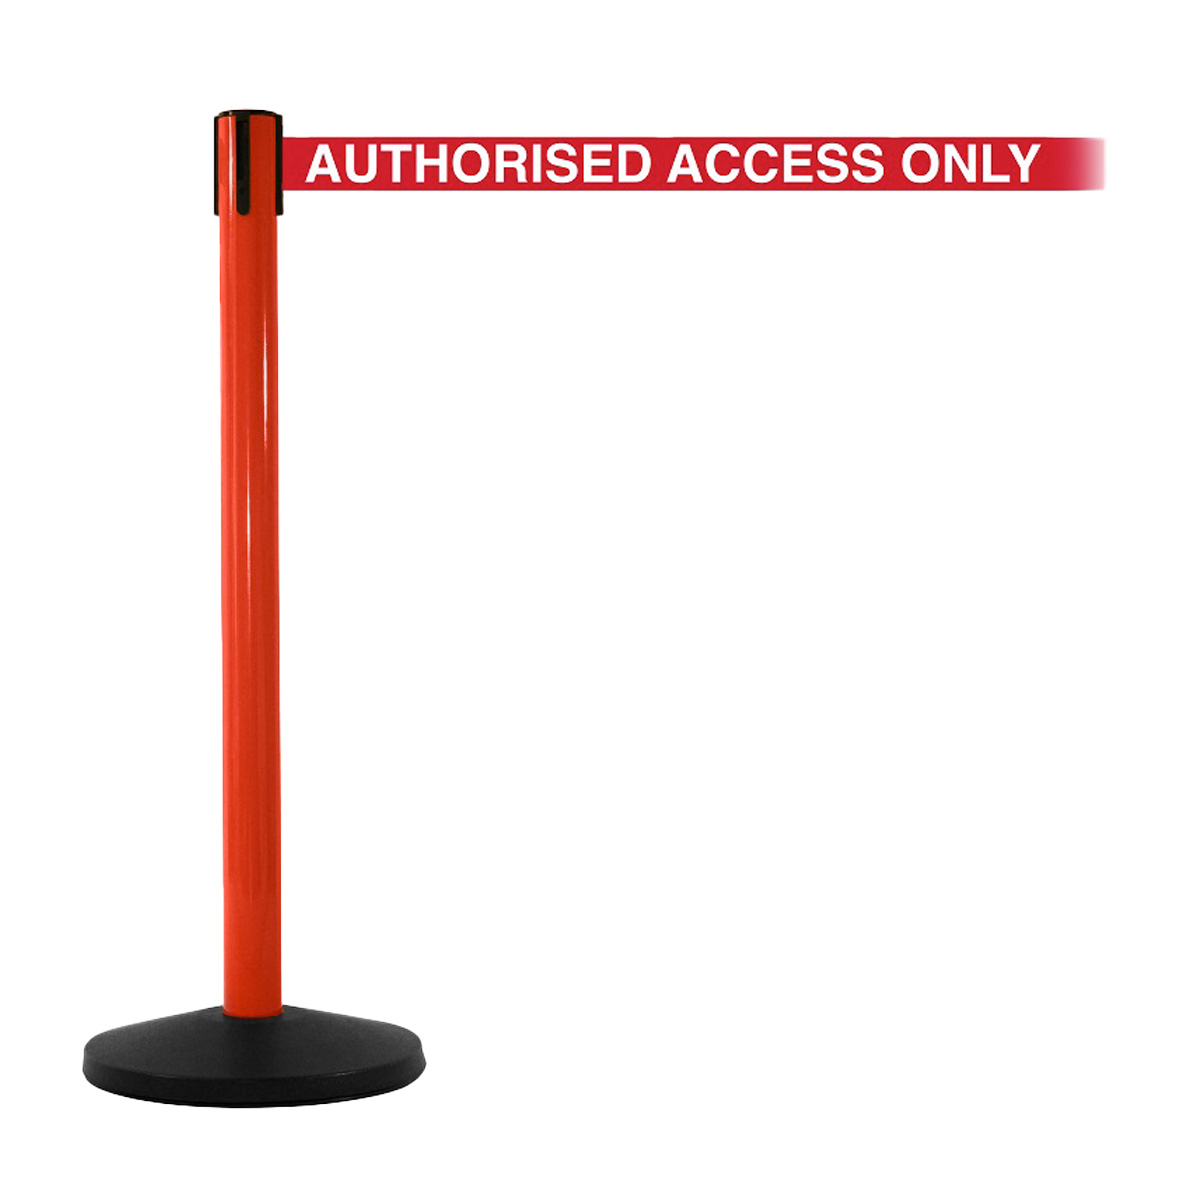 SafetyMaster High Visibility Safety Barriers With Pre-Printed Safety Messages